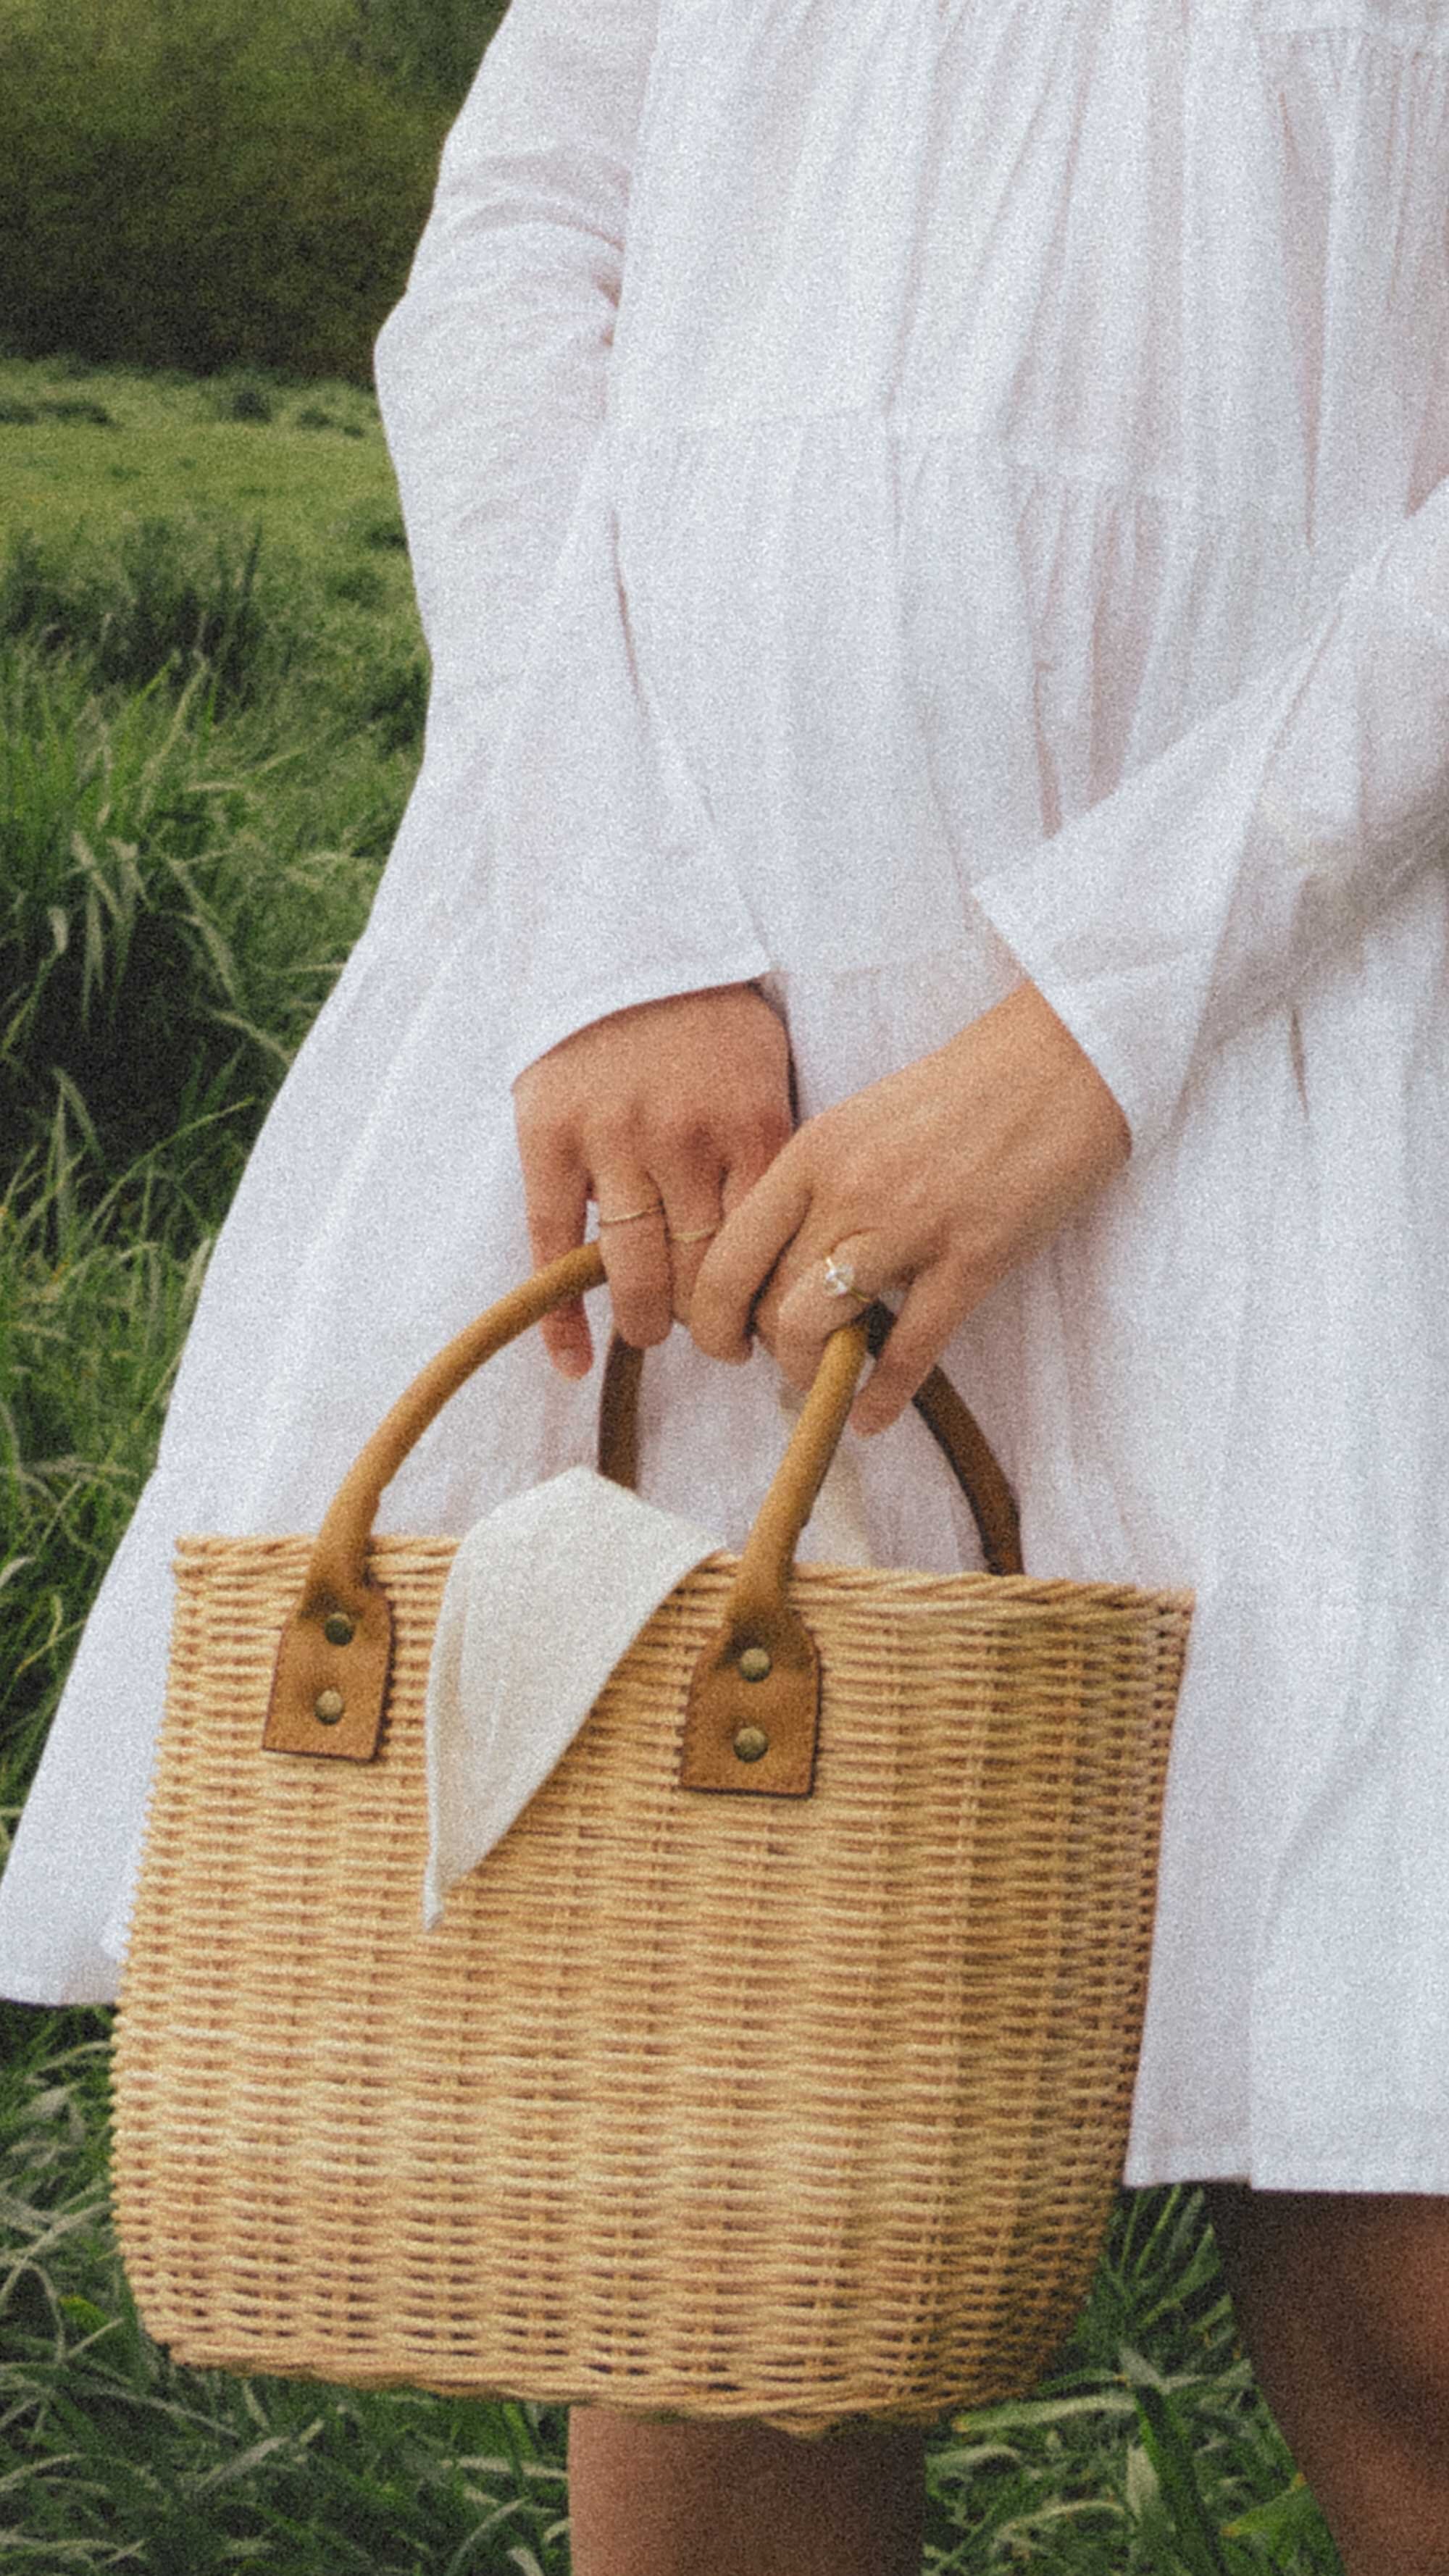 Cute white summer mini dress. Sarah Butler of @sarahchristine wearing Merlette Soliman Tiered White Mini Dress with basket bag in countryside of Seattle, Washington - 5.jpg